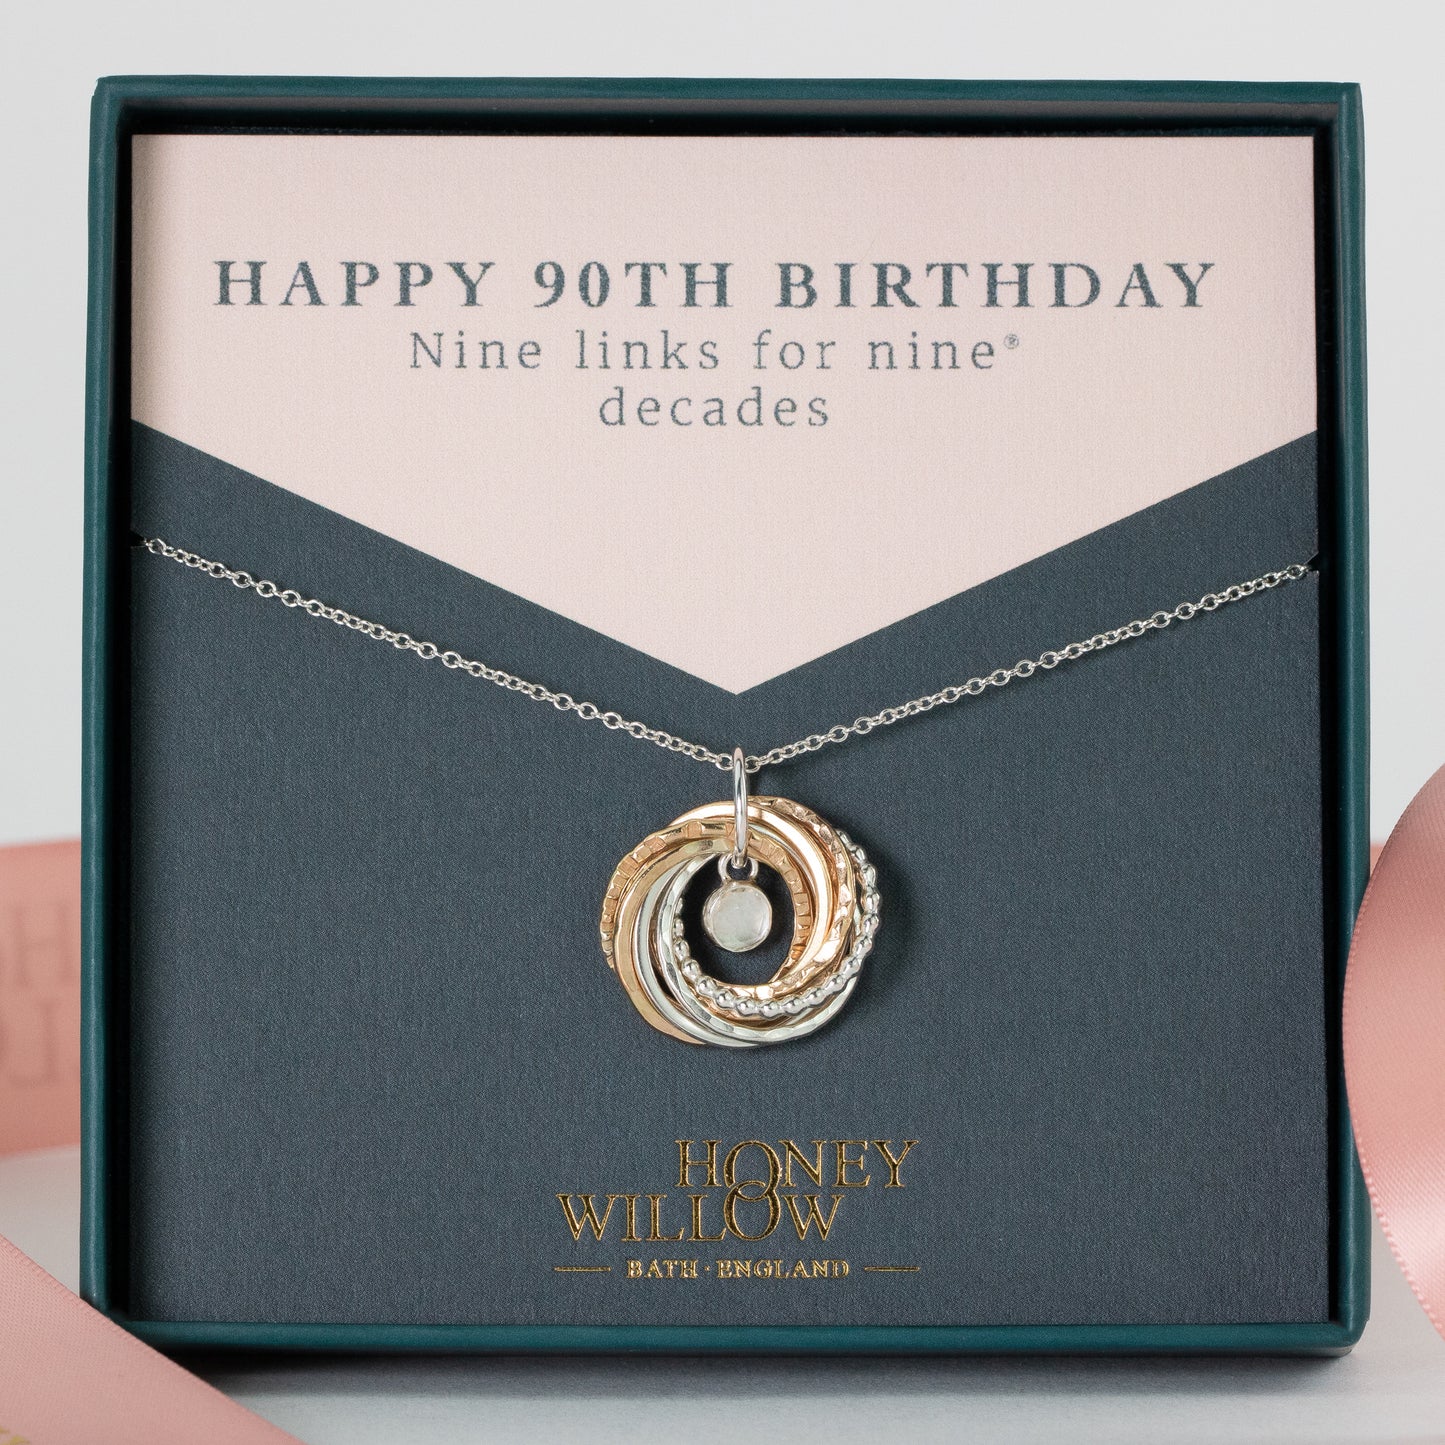 90th Birthday Birthstone Necklace - The Original 9 Links for 9 Decades Necklace - Petite Silver & Gold